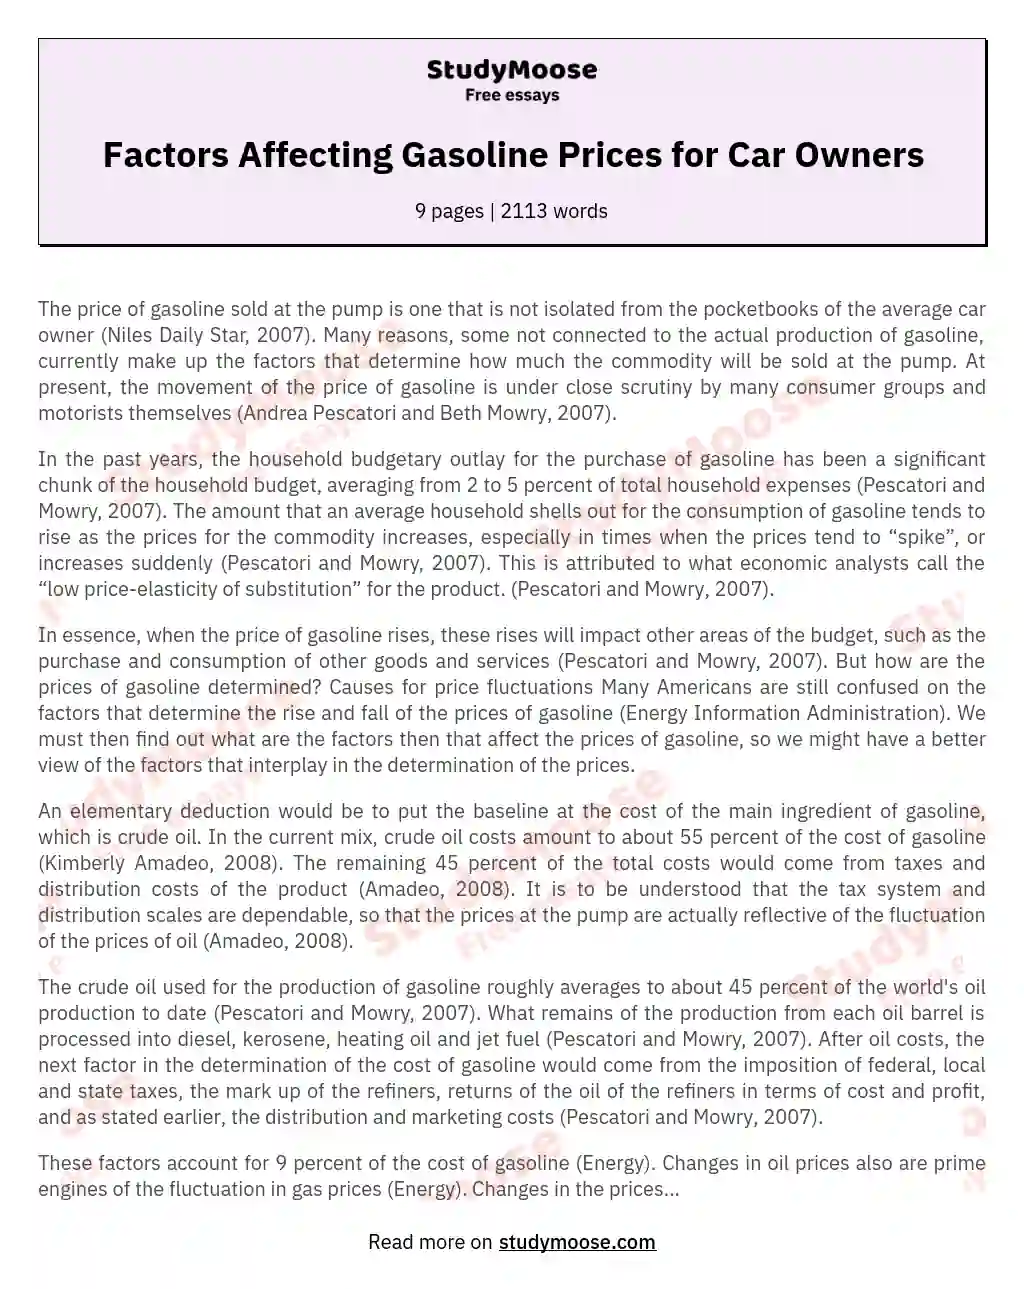 Factors Affecting Gasoline Prices for Car Owners essay